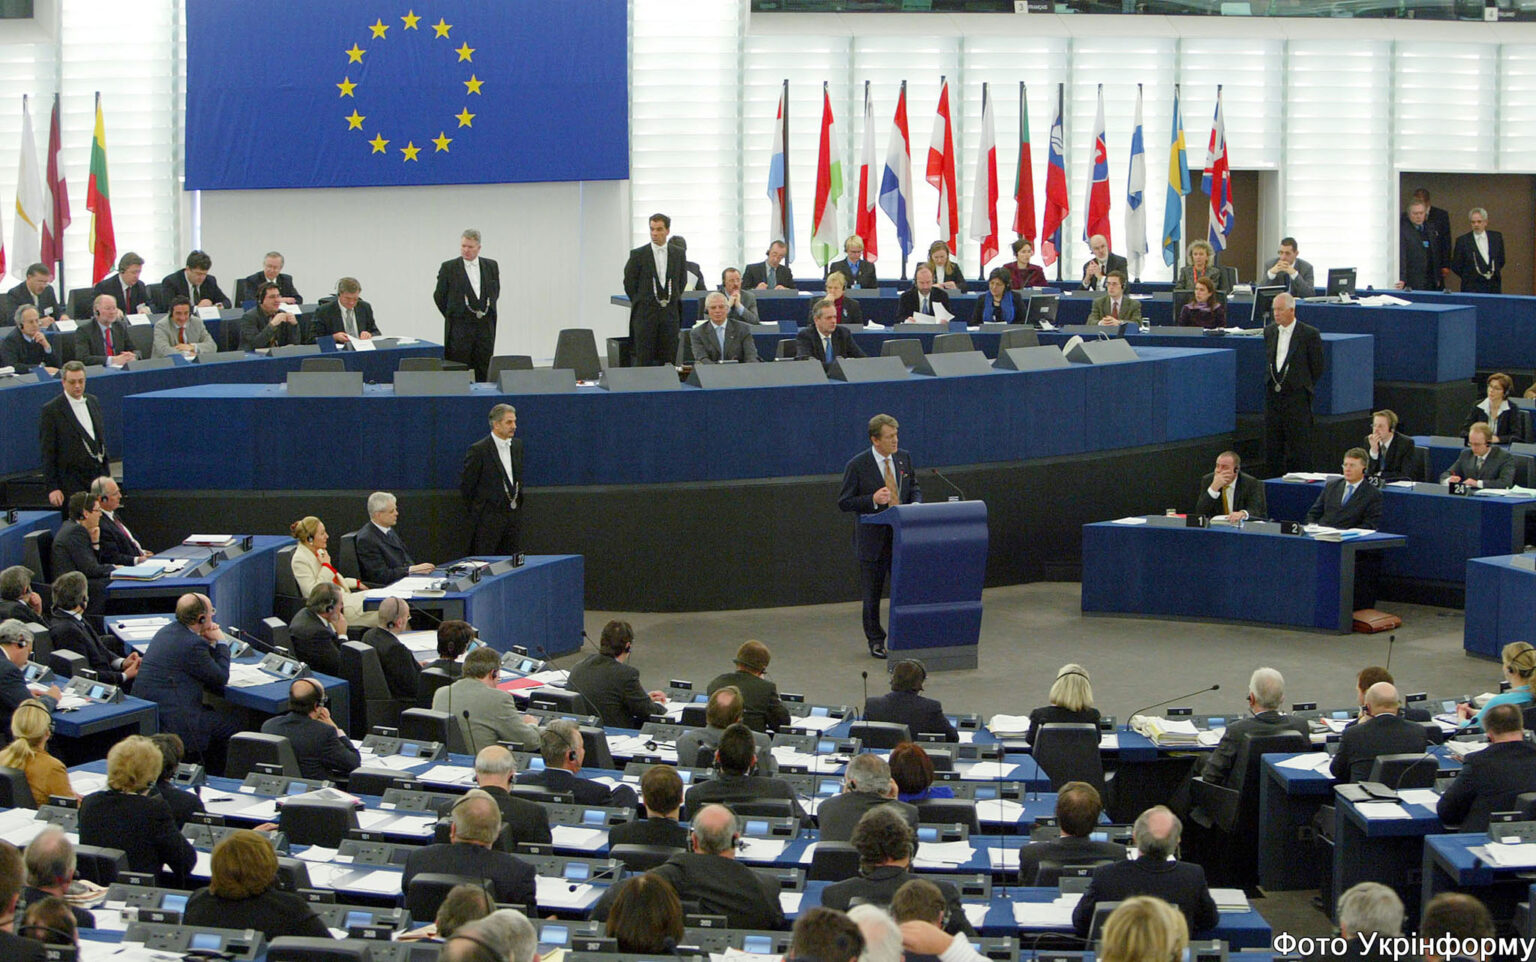 Meeting of the European Parliament in Brussels